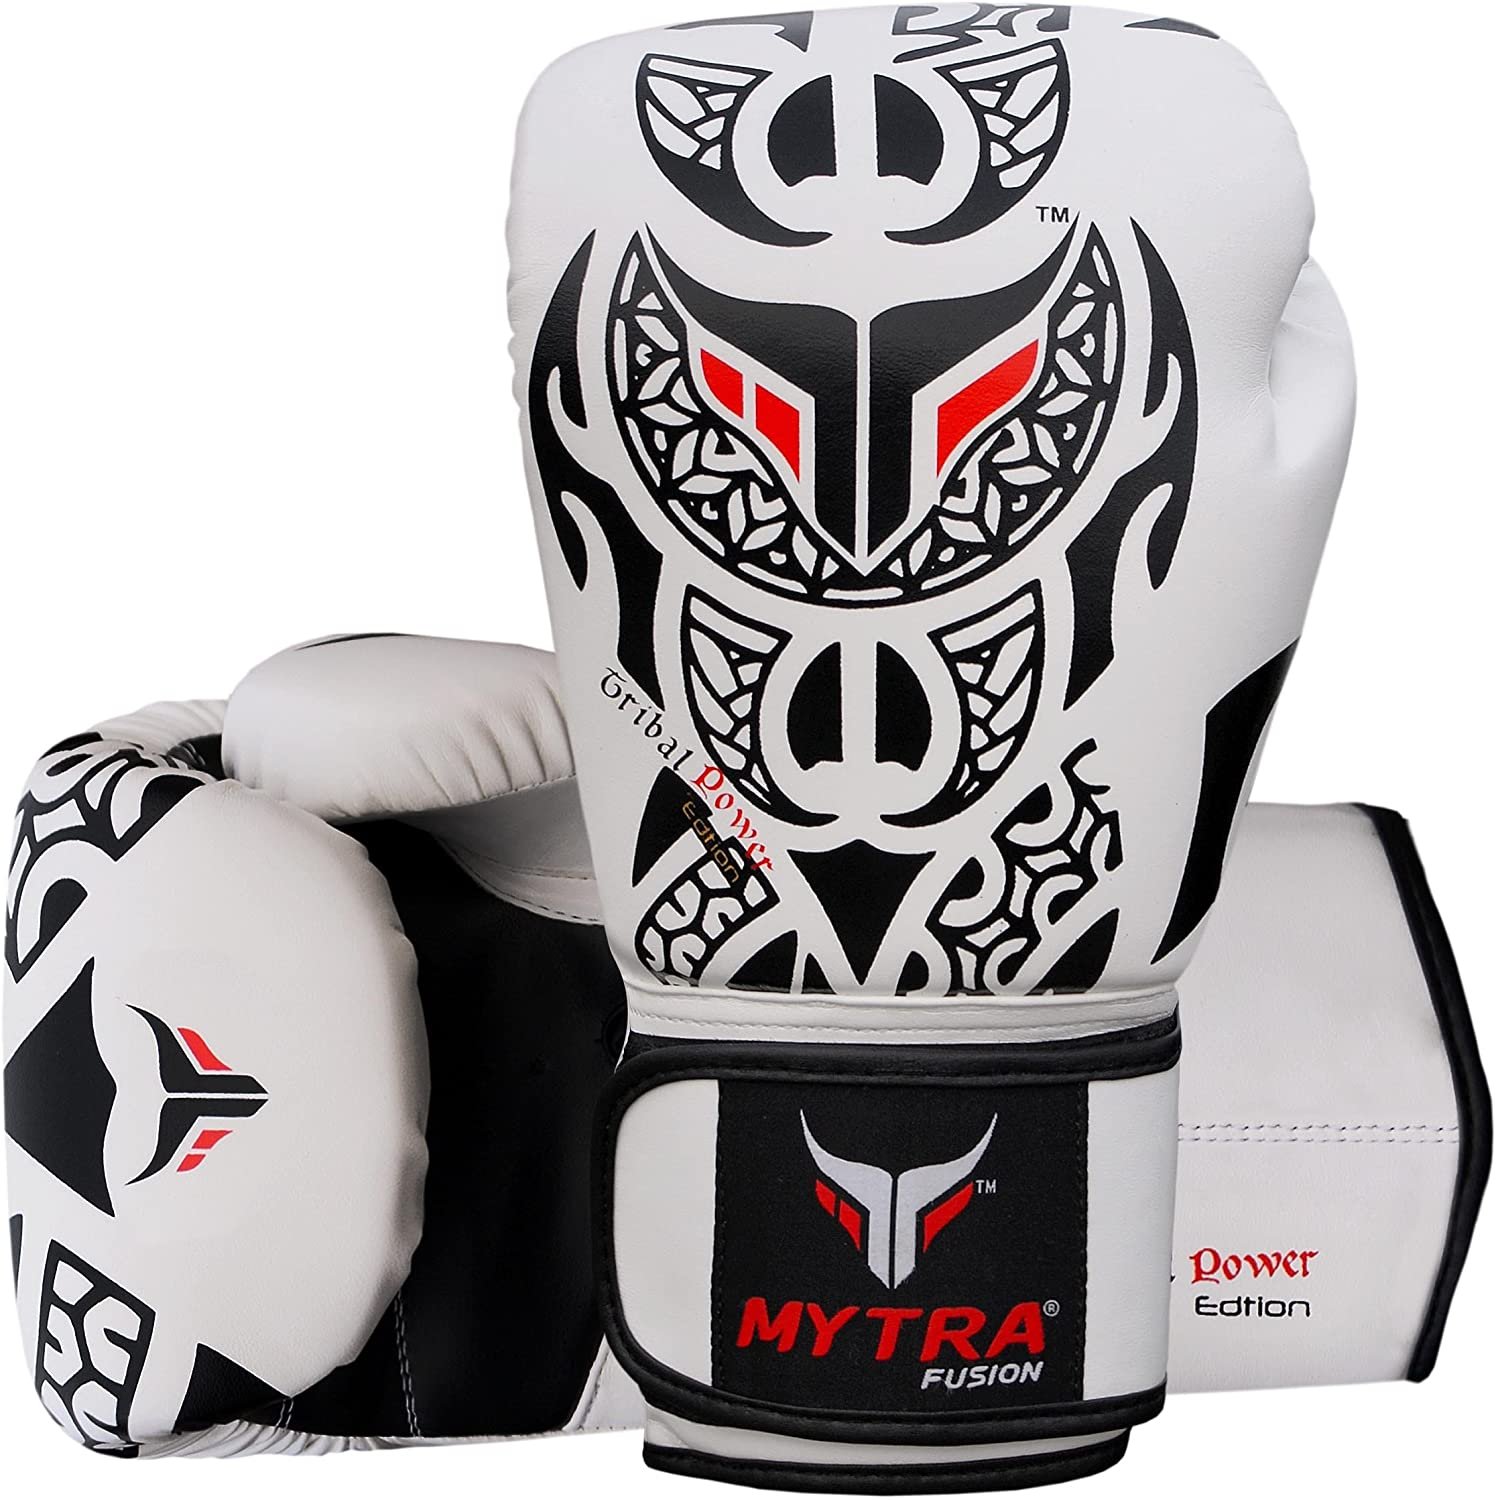 Mytra Fusion Boxing Gloves for Training Punching Sparring Punching Bag Focus Pads Gloves